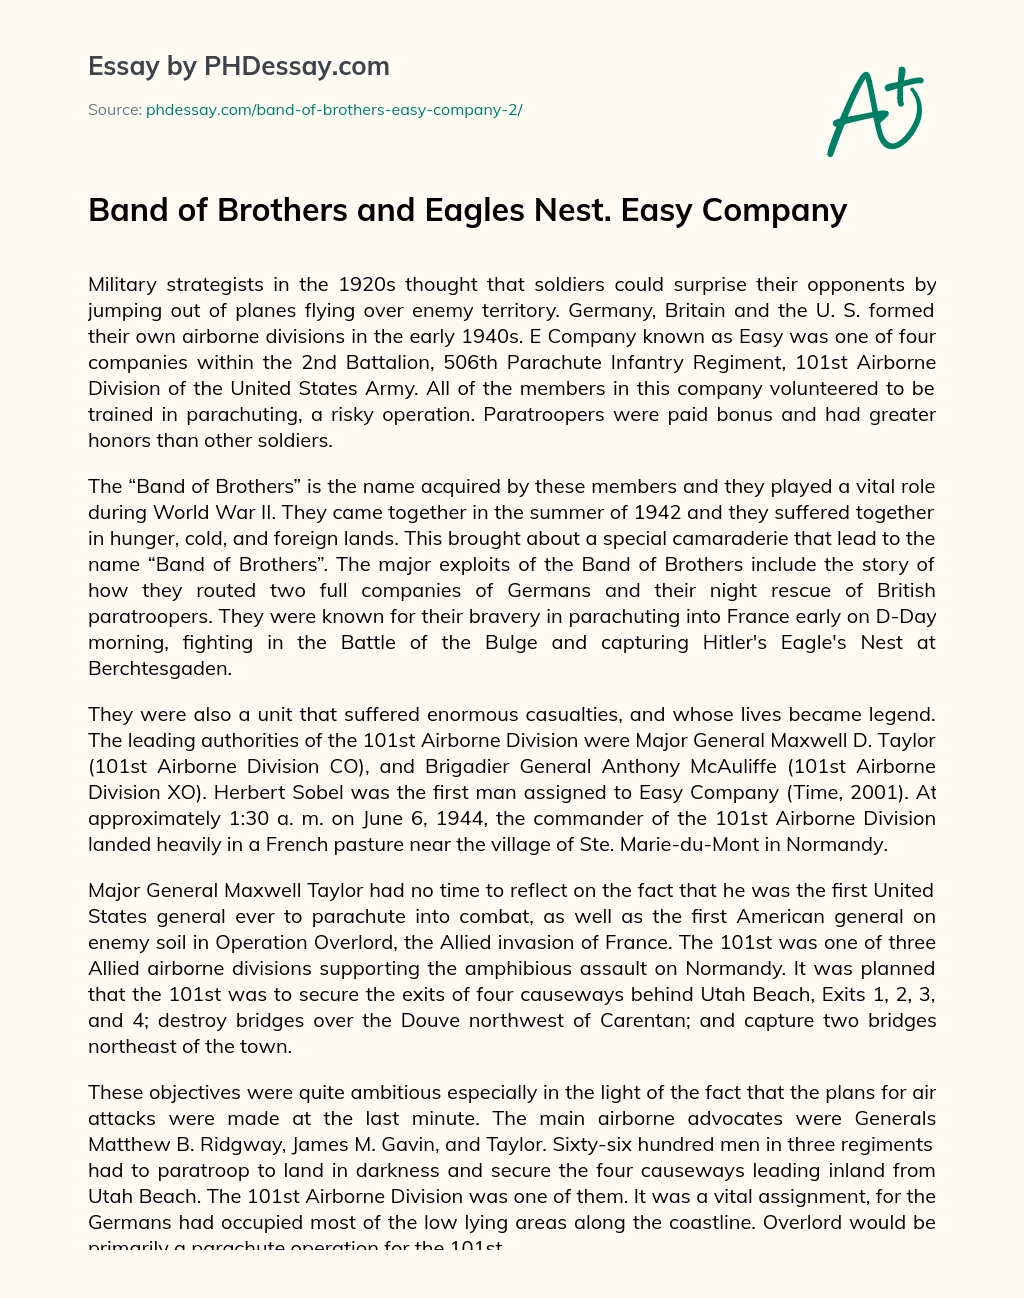 Band of Brothers and Eagles Nest. Easy Company essay